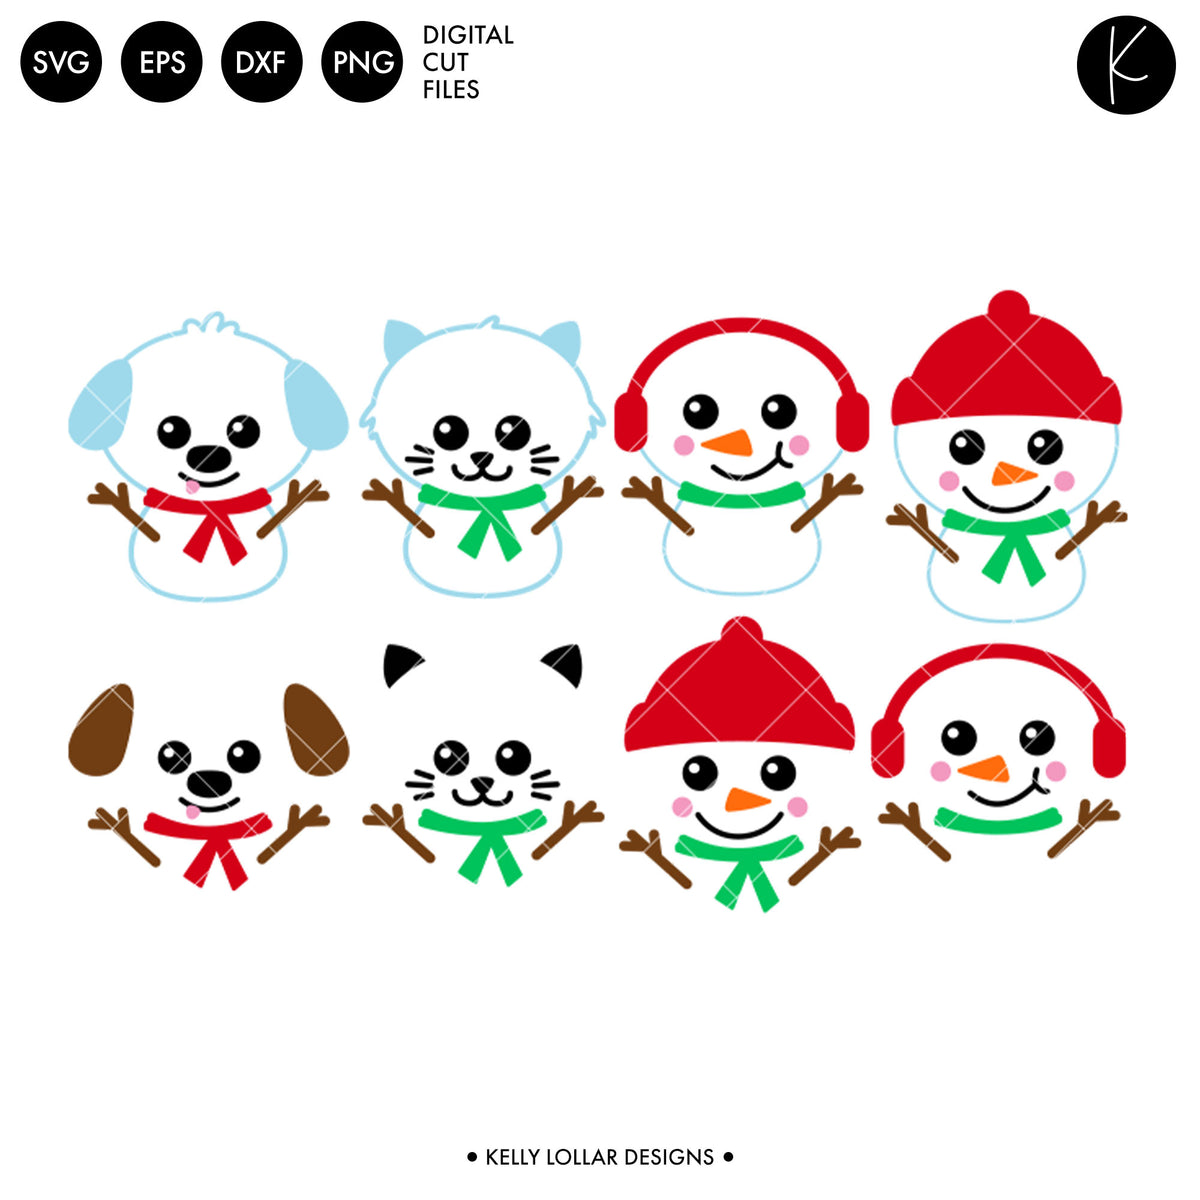 Cute Snowman Family Pack | SVG DXF EPS PNG Cut Files